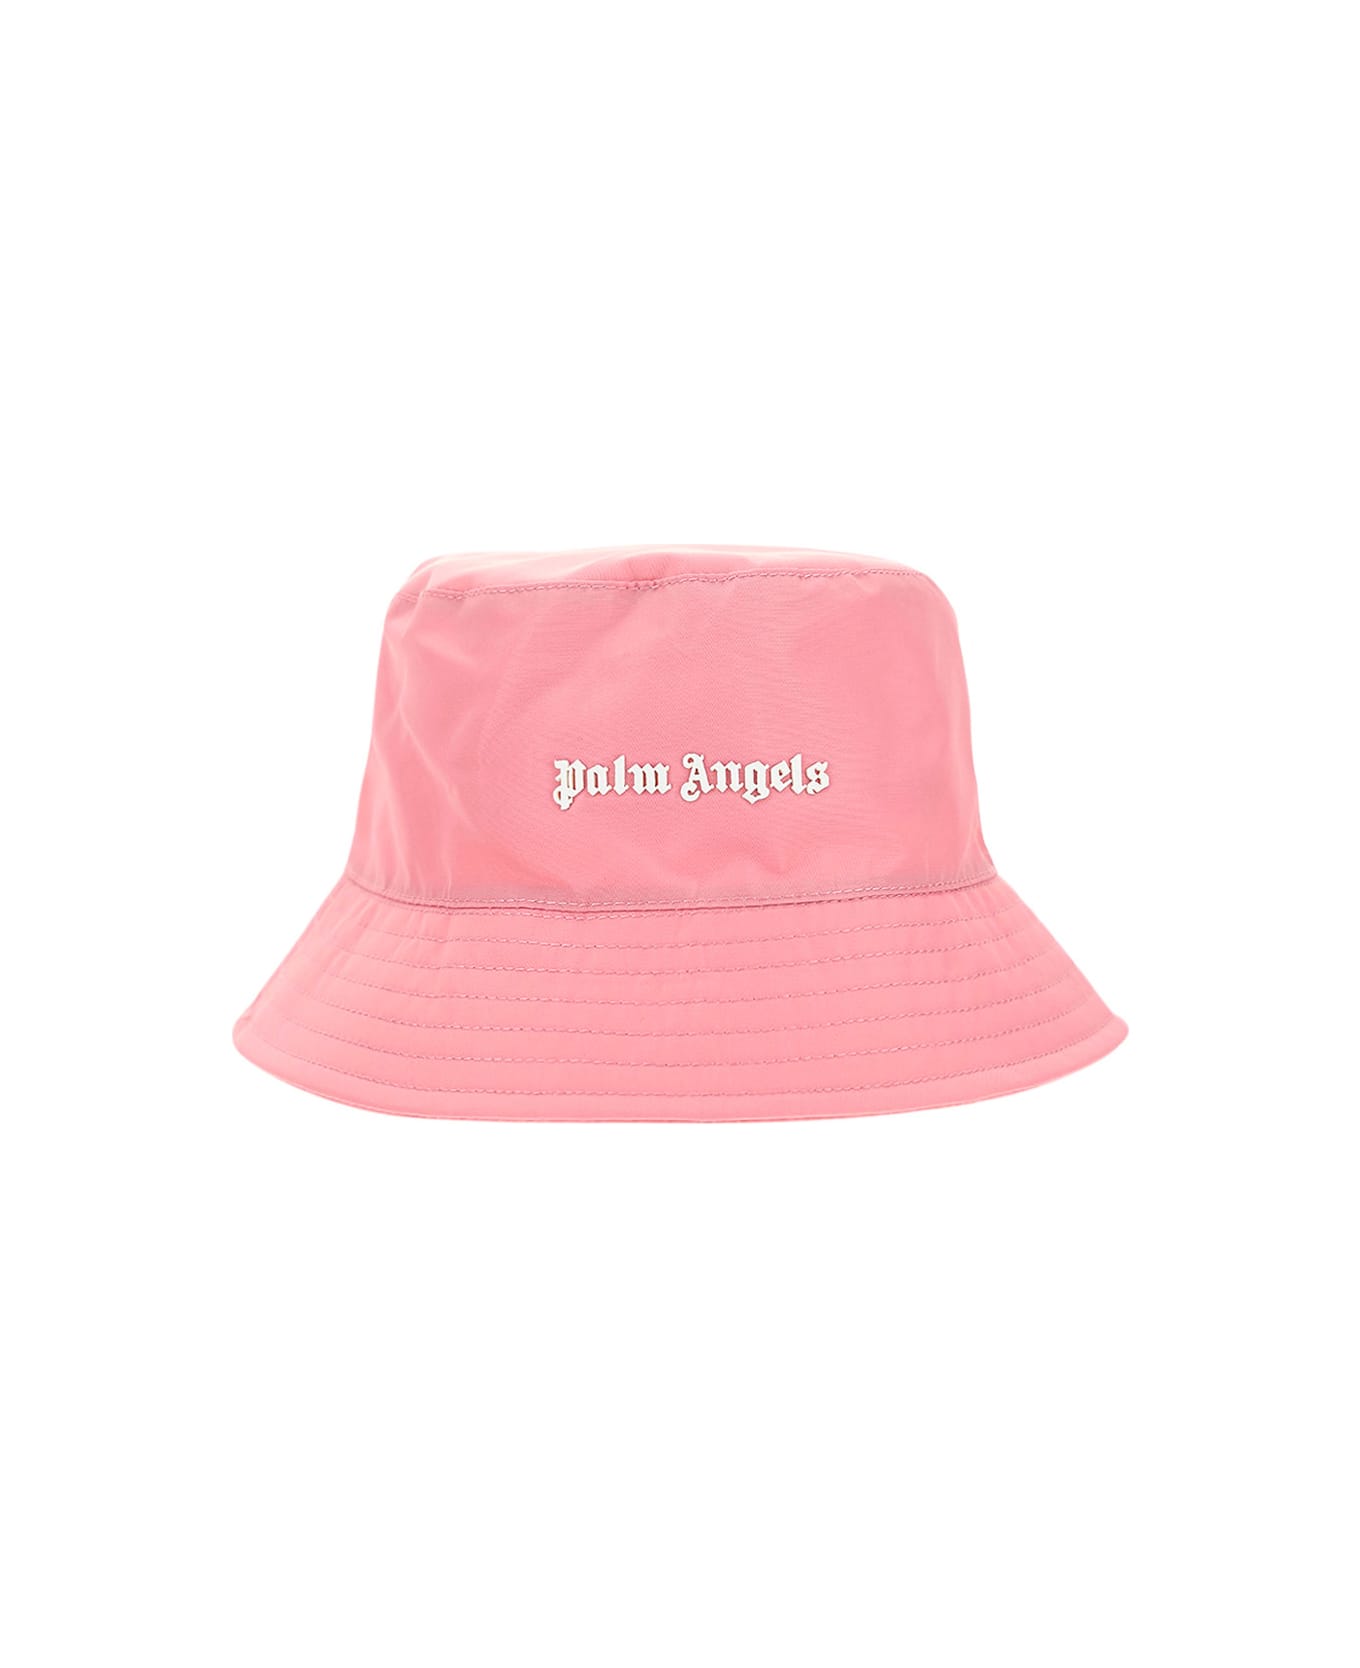 Palm Angels Bucket Hat With Logo - Pink